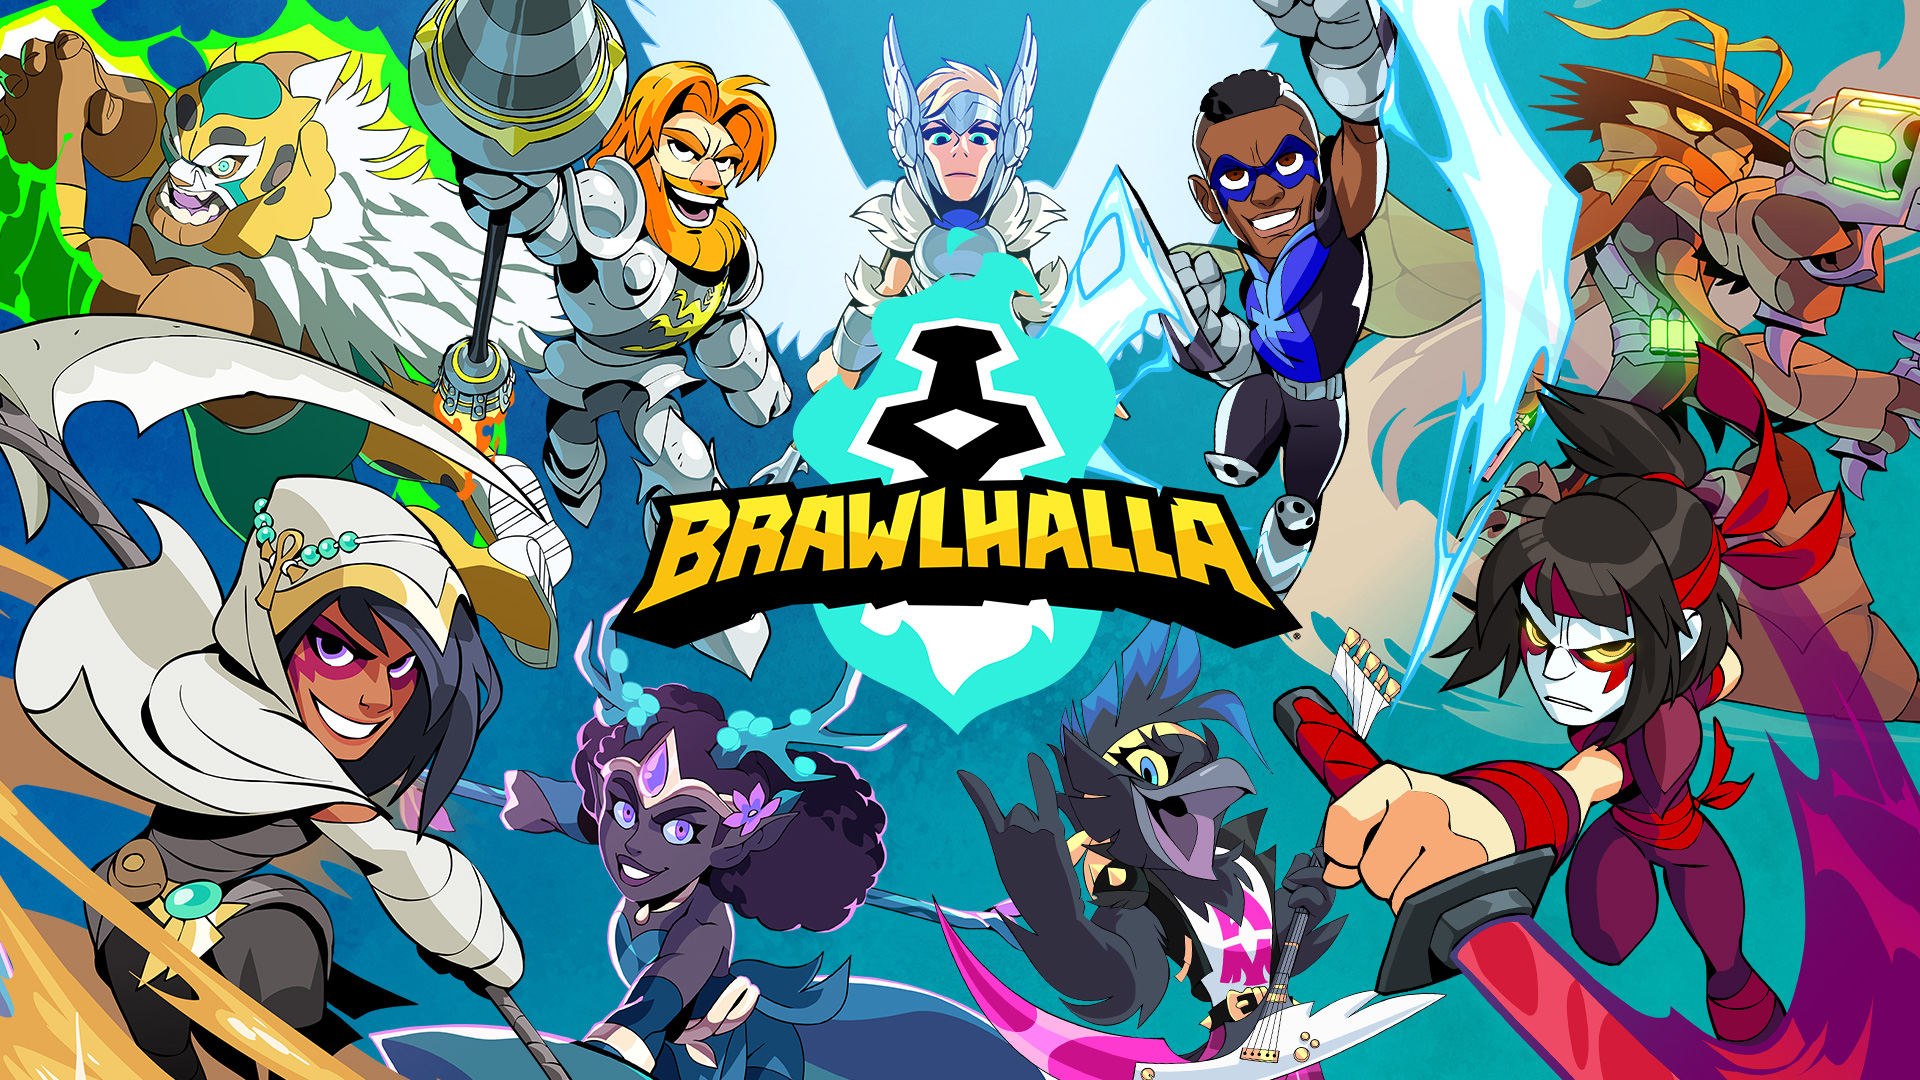 Here is the Brawlhalla Patch 7.12 Balance Preview